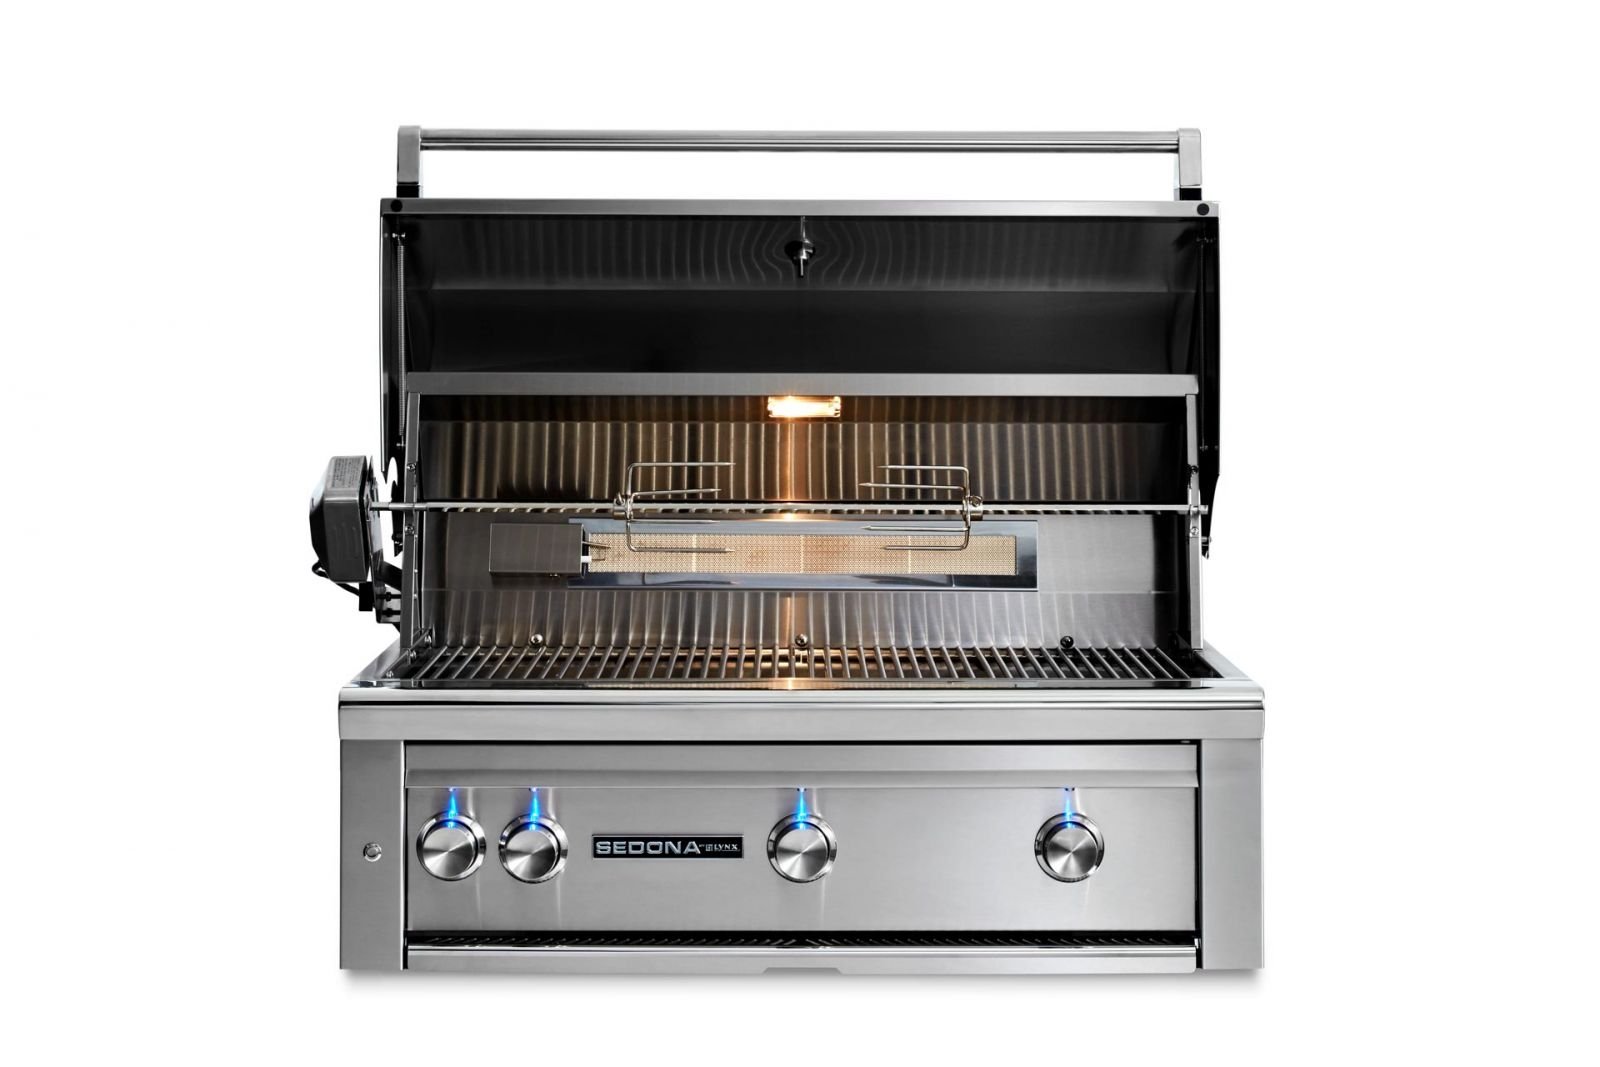 36" Built-in Grill with 1 Prosear Burner and 2 Stainless Steel Burners and Rotisserie (L600PSR)